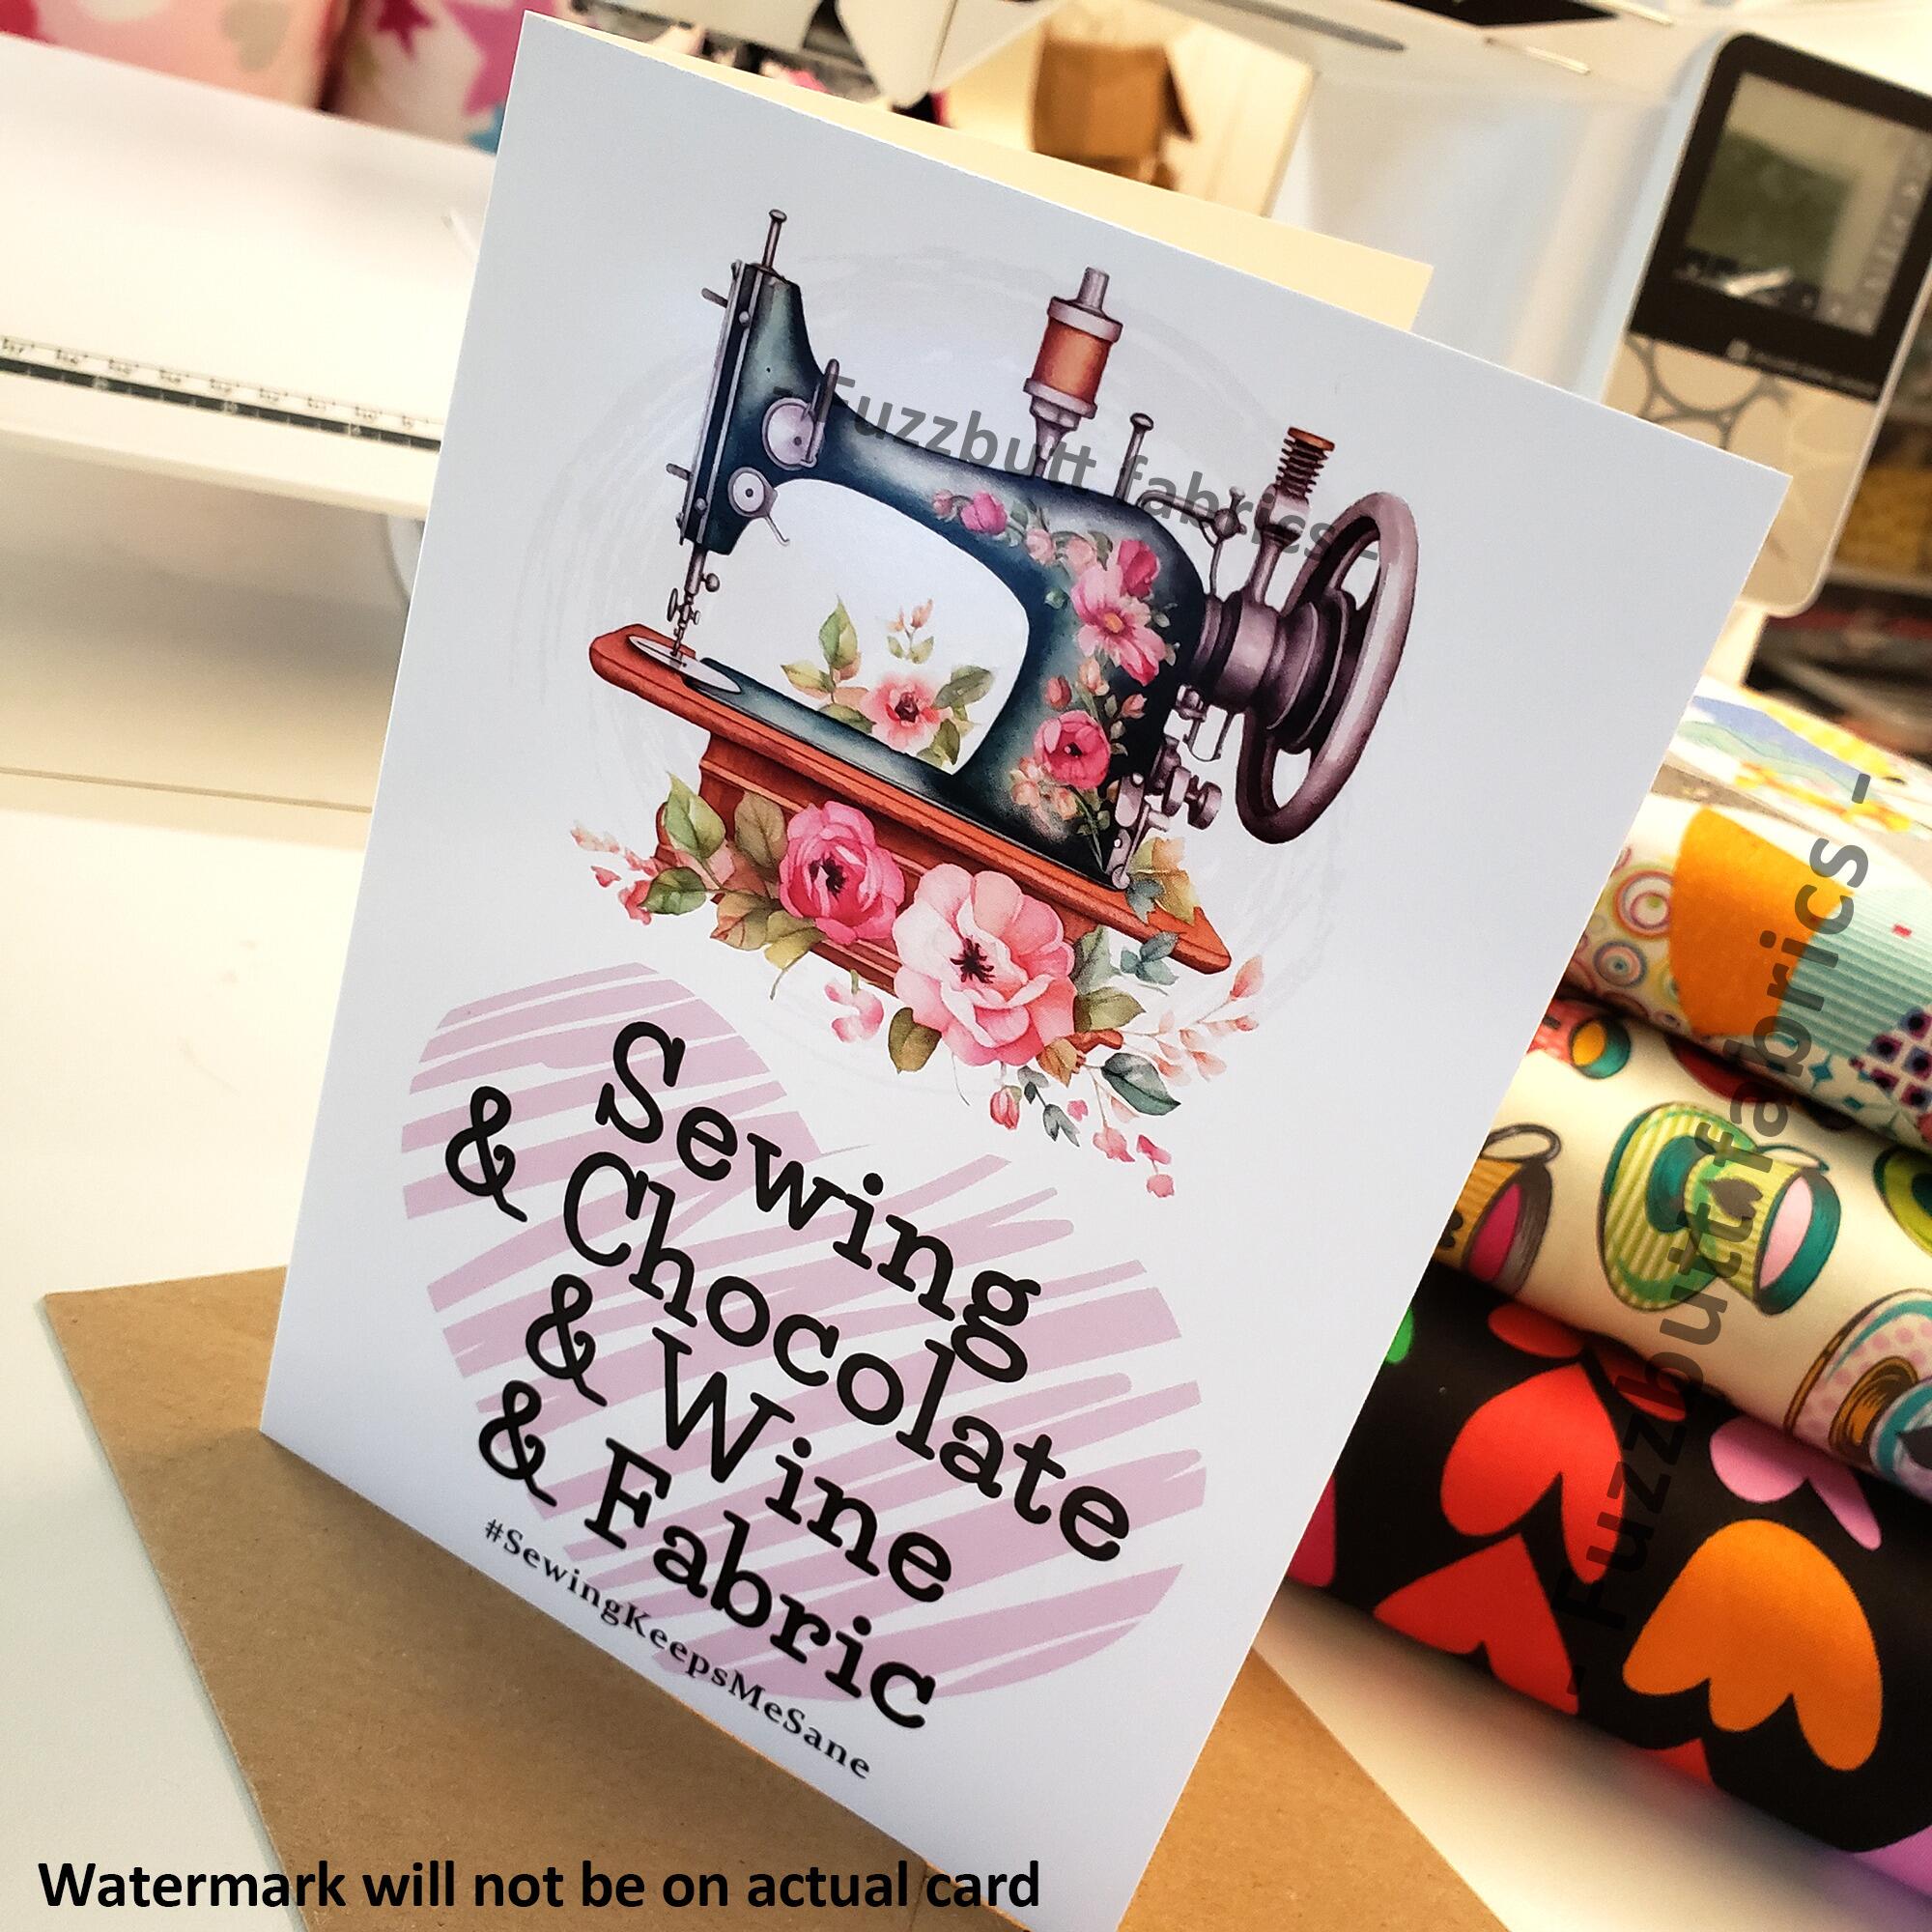 cats,dogs,G&T,wine,quilting, sewing themed birthday card, sewing card, greetings card, uk sewing birthday cards, sewing themed card, quilting themed card